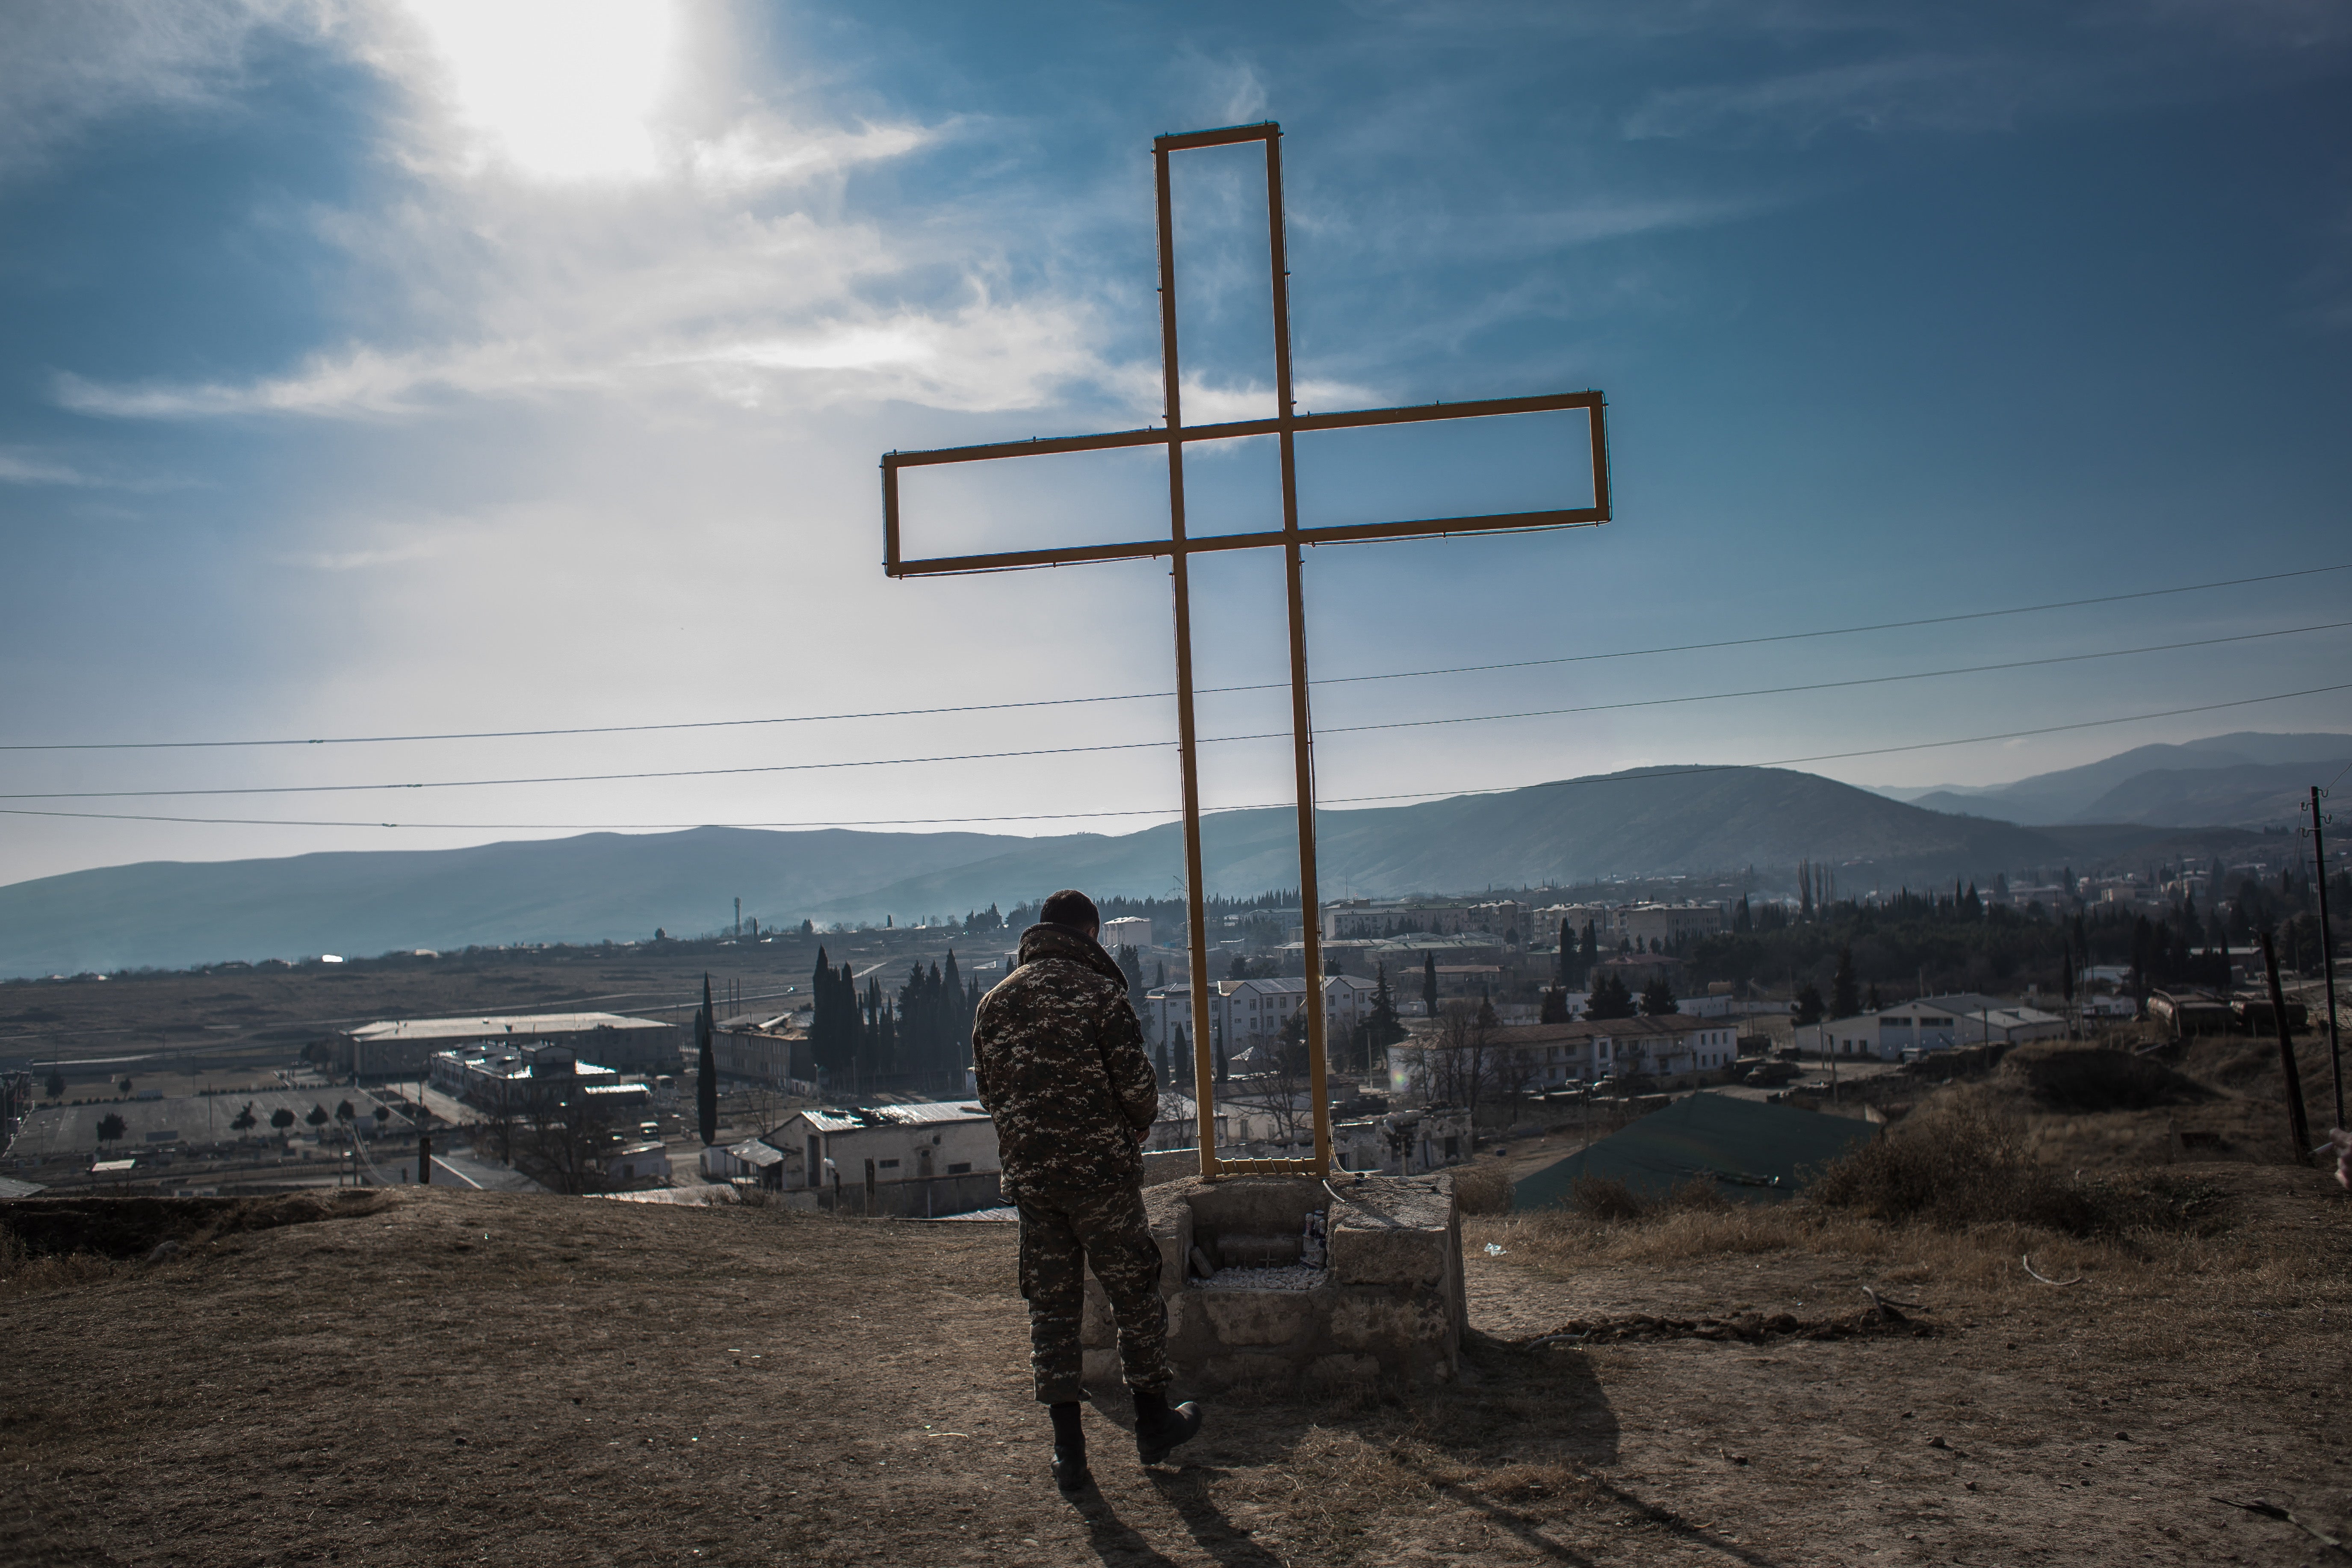 An Armenian soldier prays in front of a cross at a military position in Martakert in Nagorno-Karabakh on 17 January